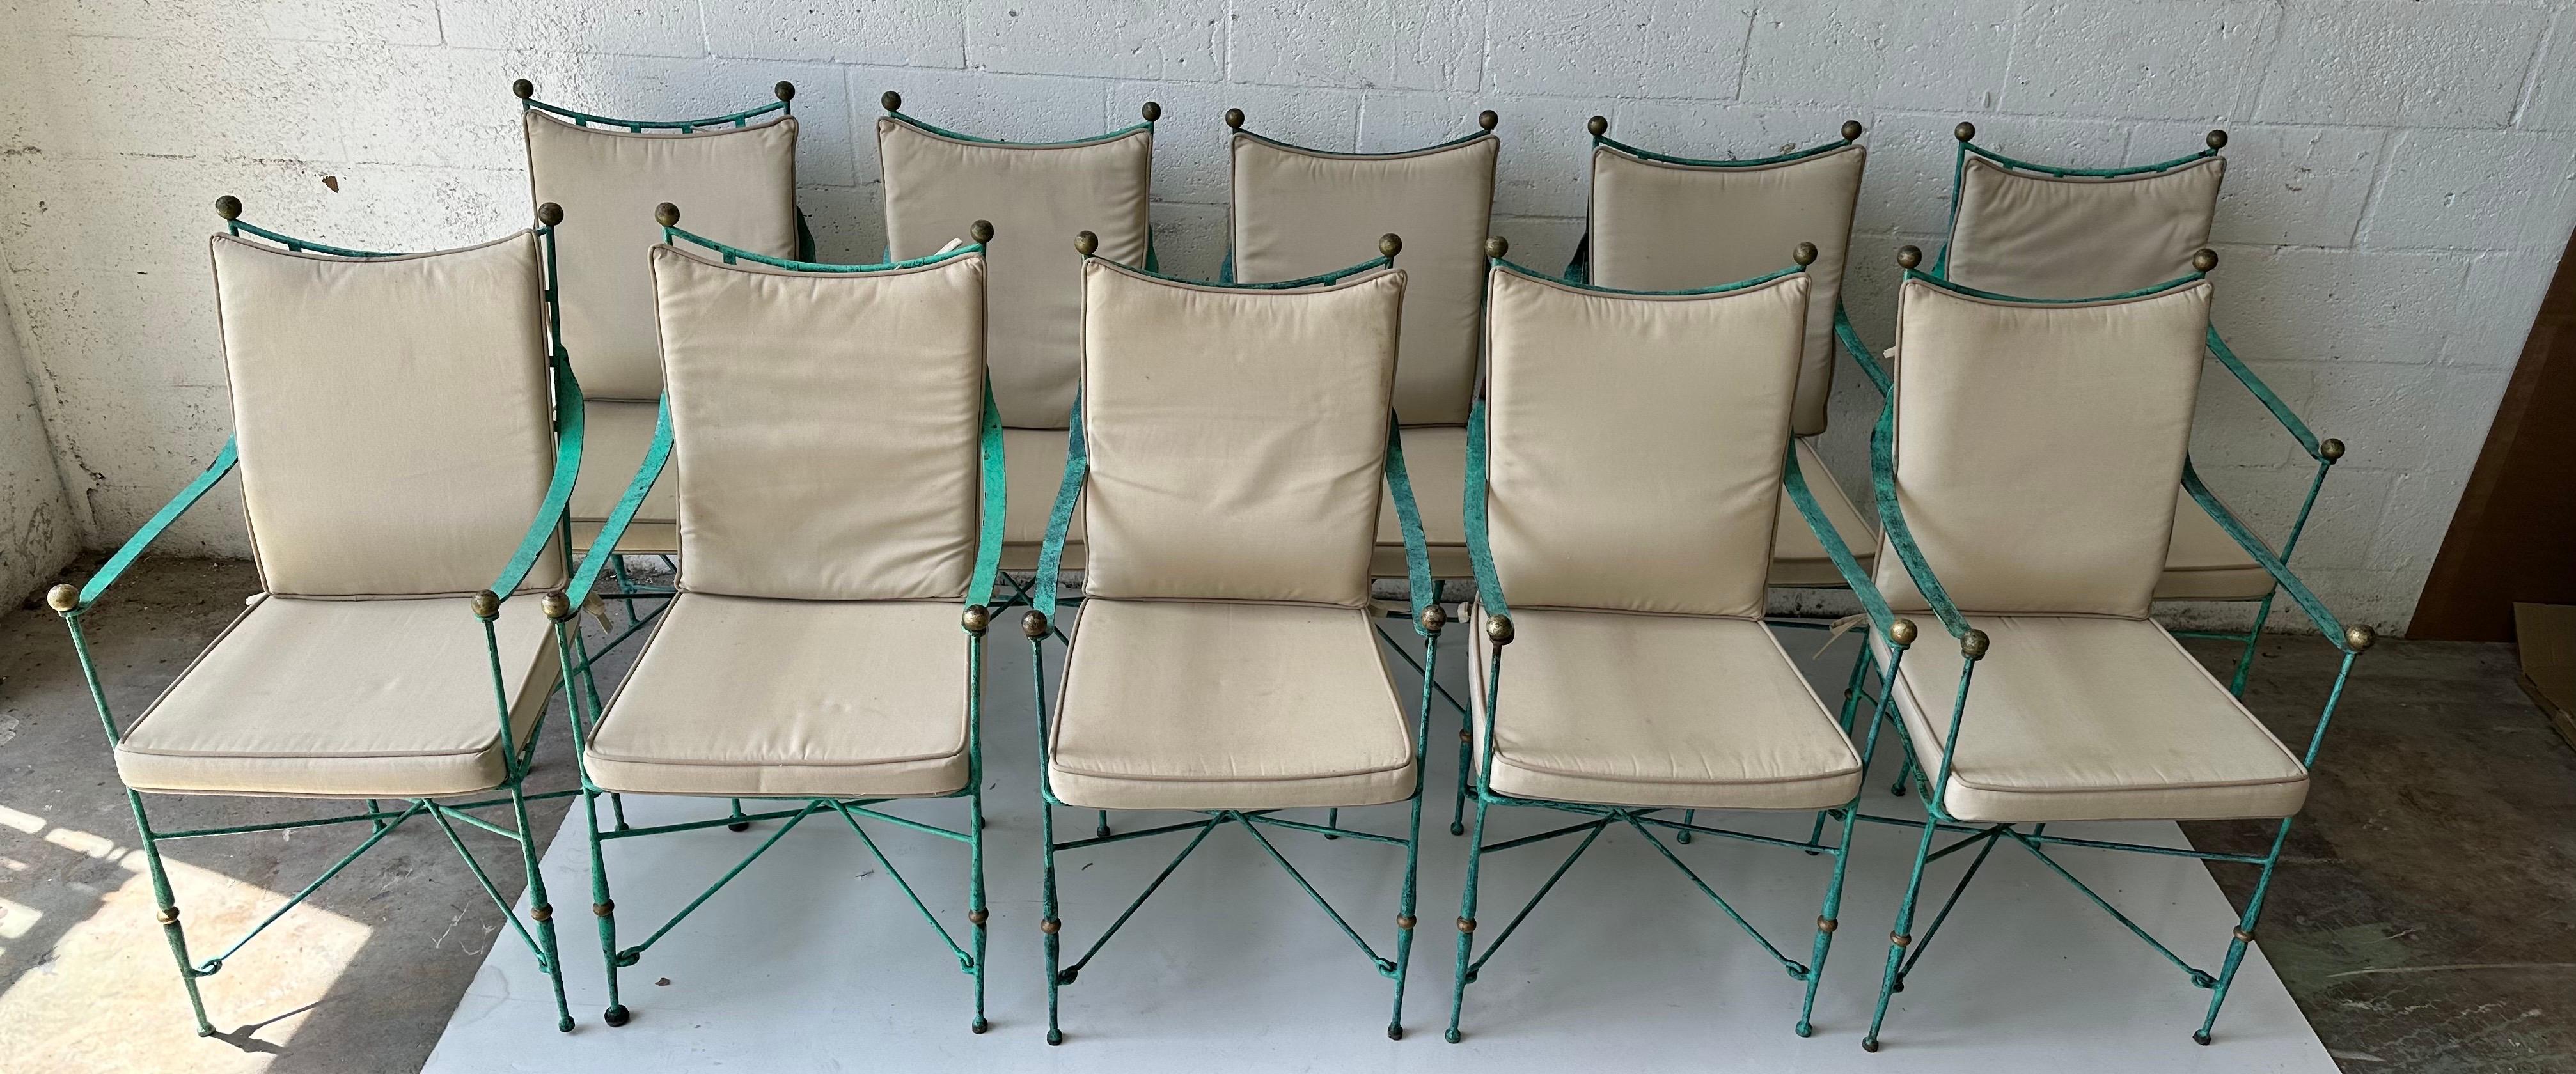 Set of 10 Maison Jansen  Style wrought  iron Armchair  In Fair Condition For Sale In Miami, FL